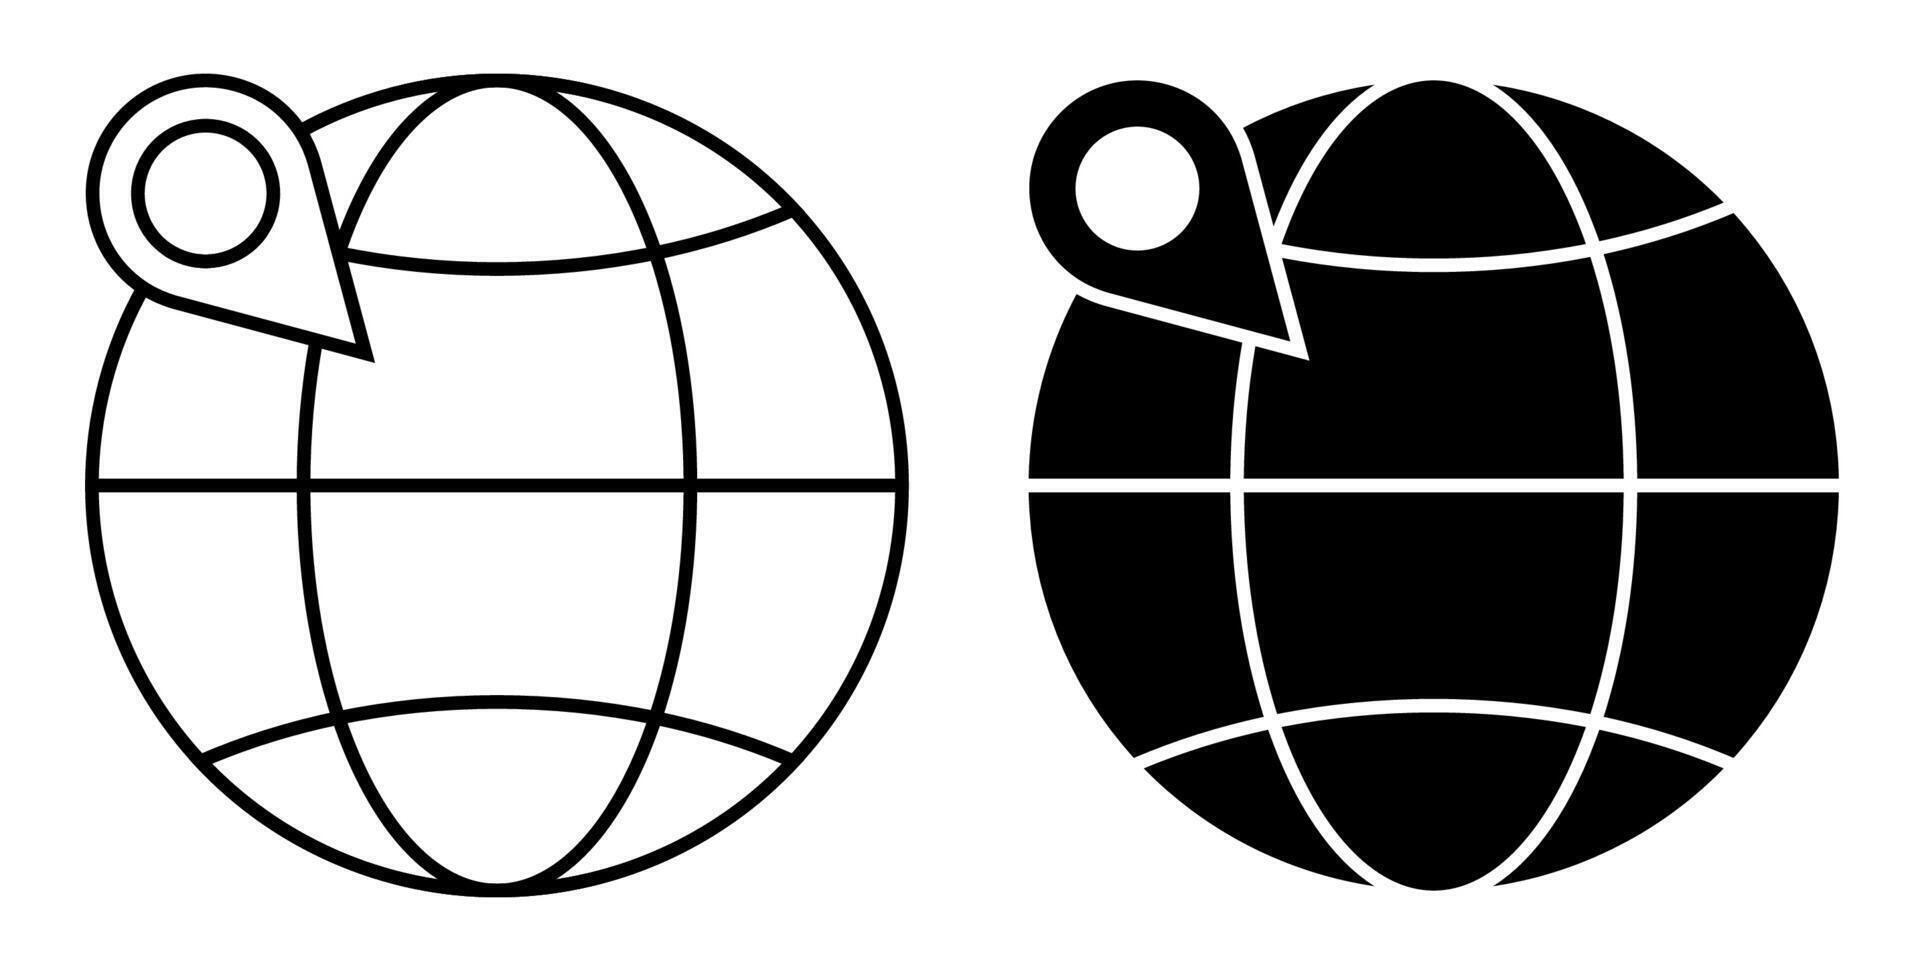 globe with checkpoint mark. Navigation on map using GPS system. Simple black and white vector